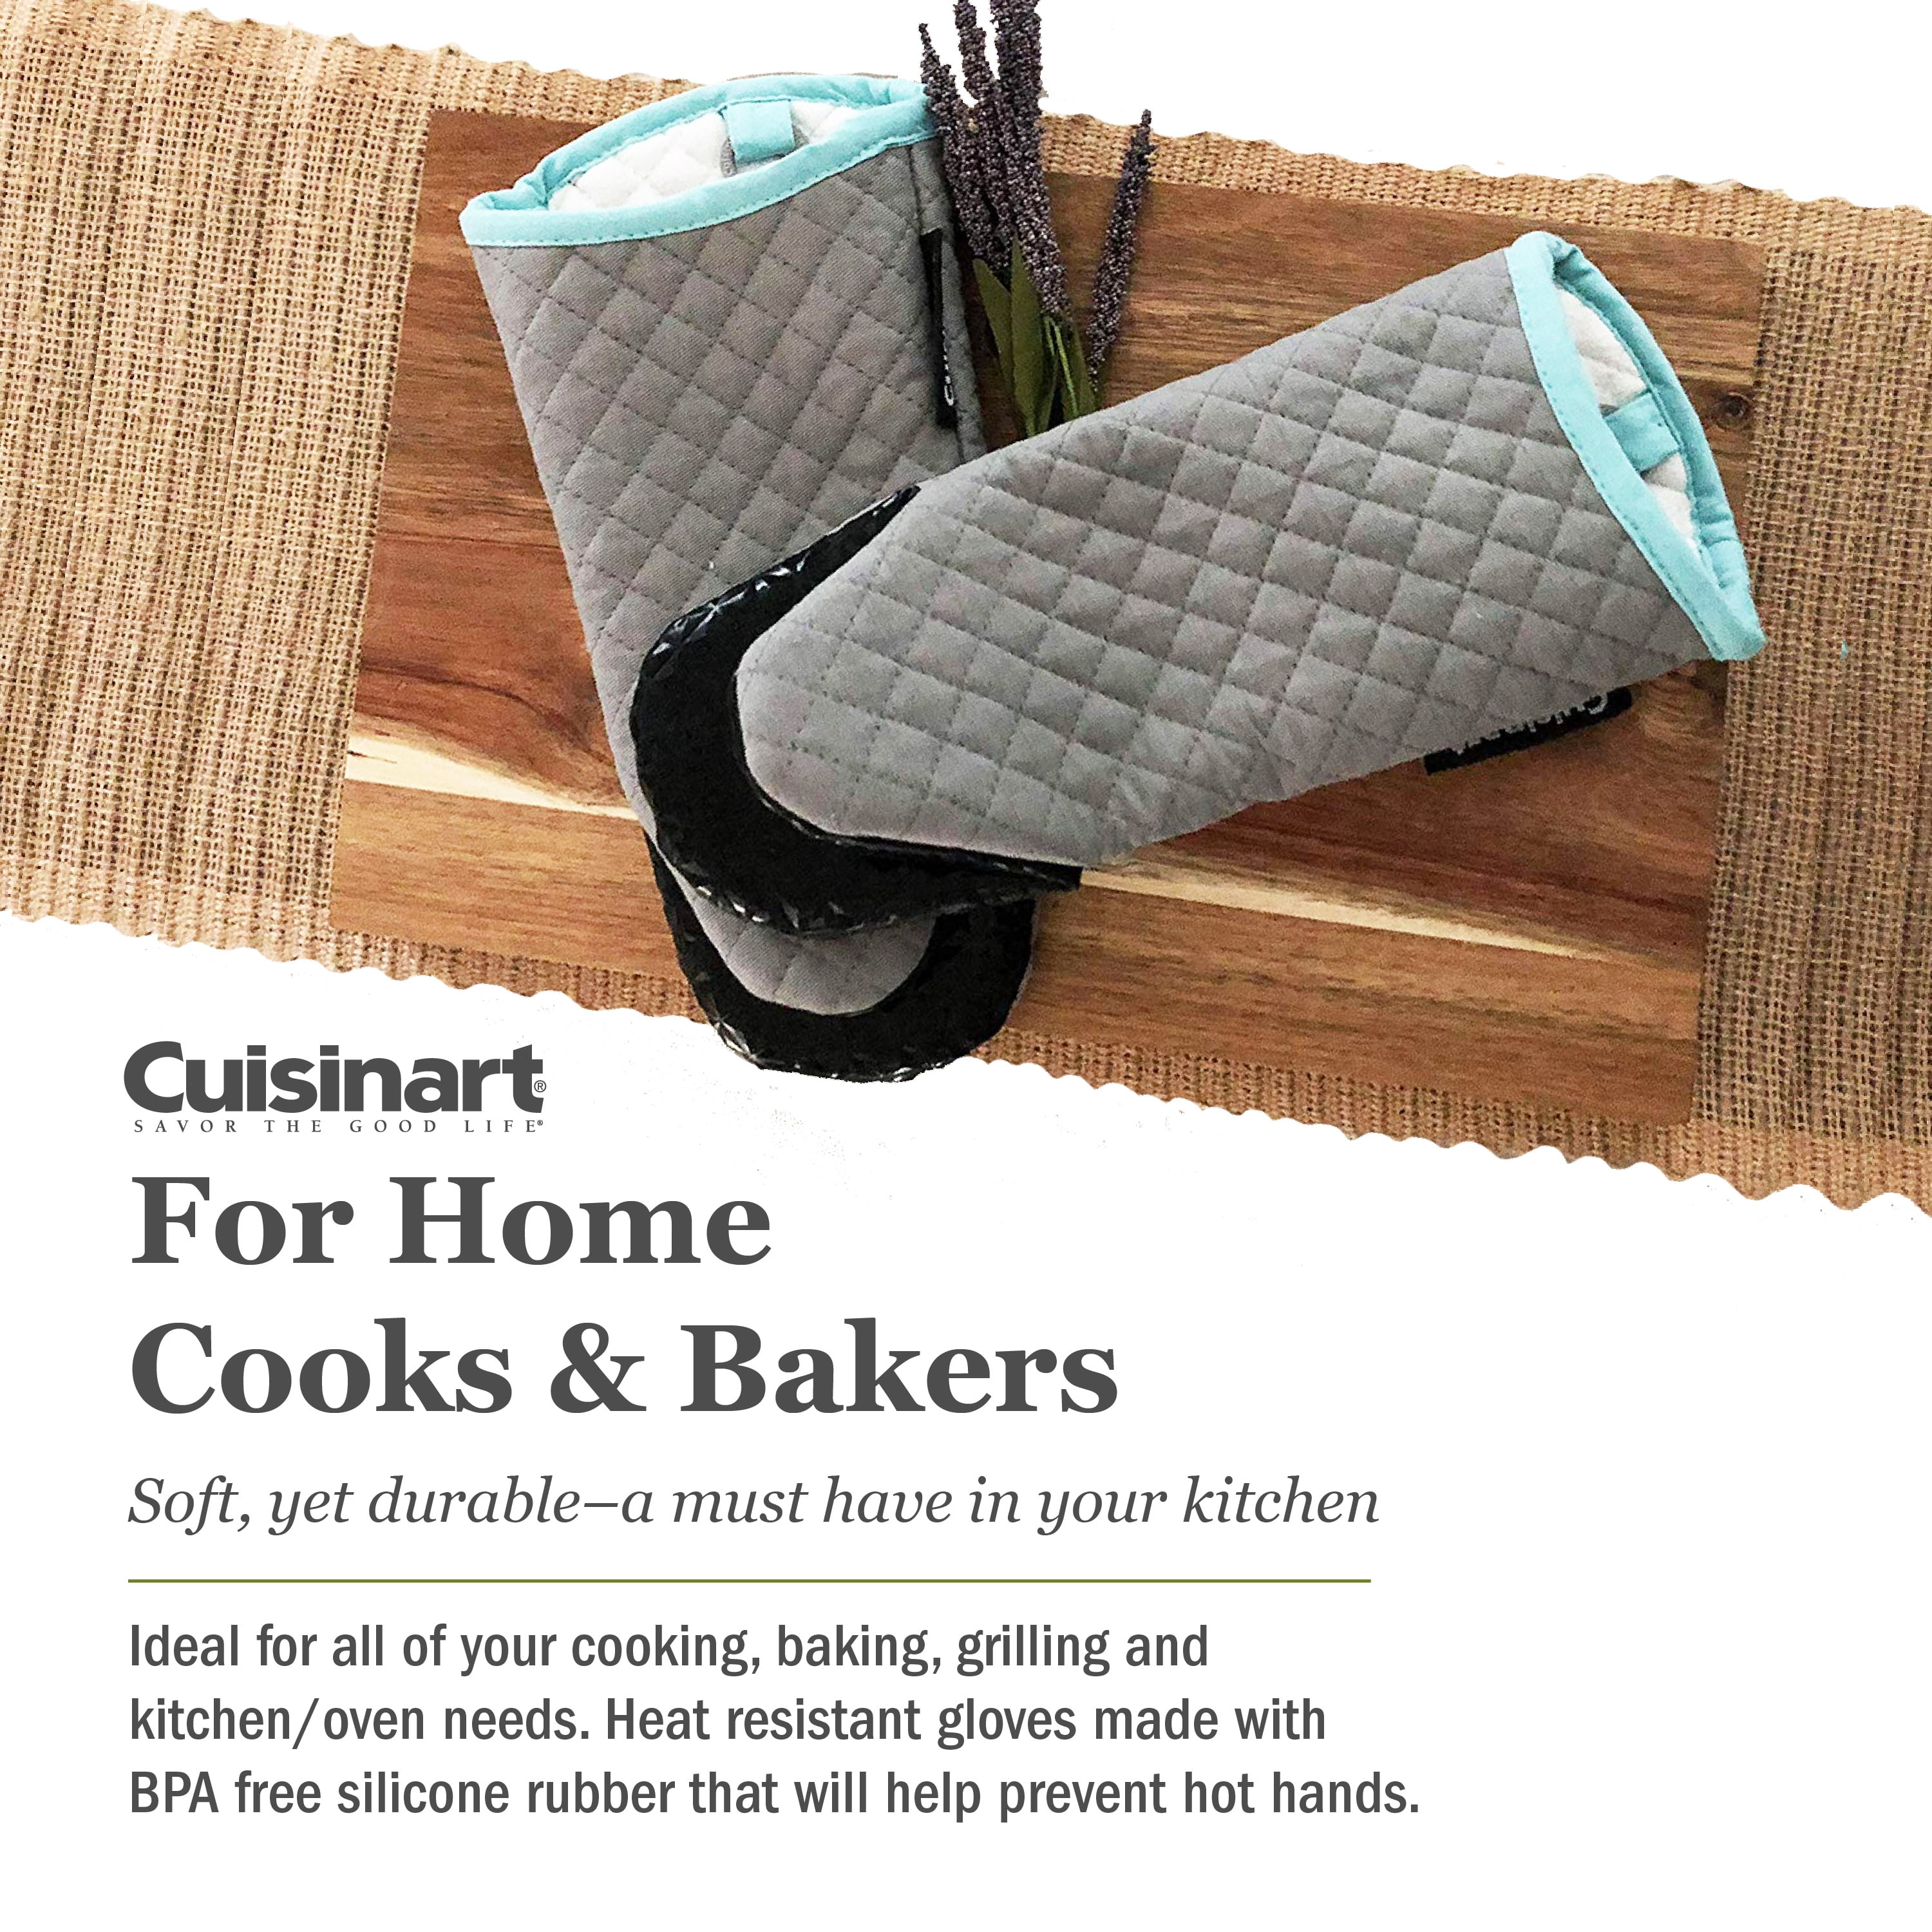 1 Pair Short Oven Mitts - Silicone Kitchen Oven Gloves High Heat Resistant  500℉, Mini Oven Mits with Non-Slip Grip Surfaces and Hanging Loop for BBQ